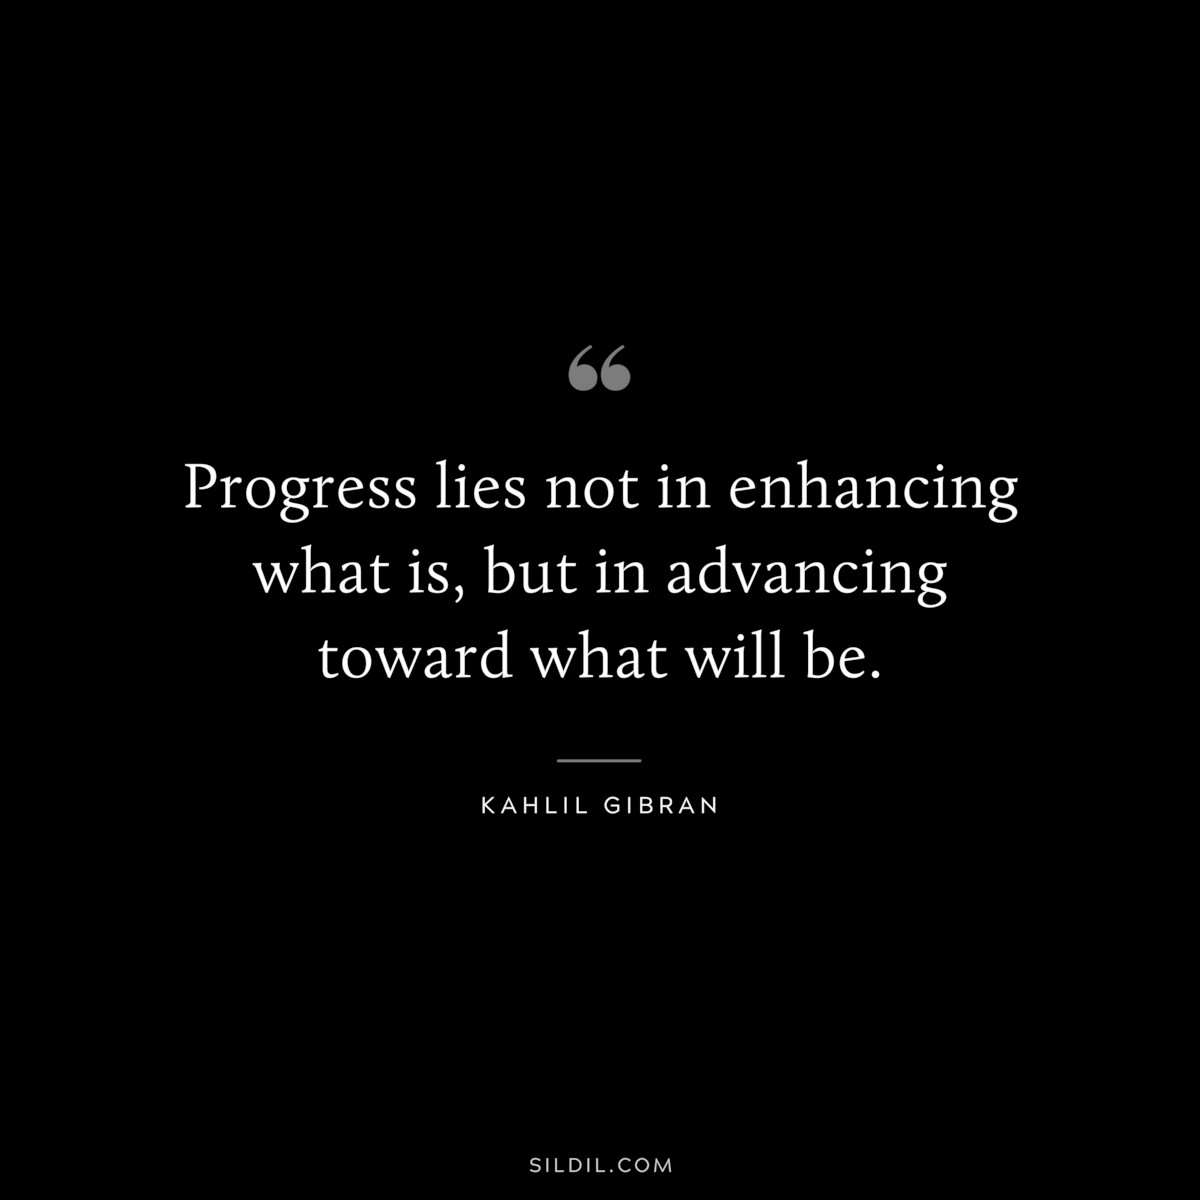 Progress lies not in enhancing what is, but in advancing toward what will be. ― Kahlil Gibran